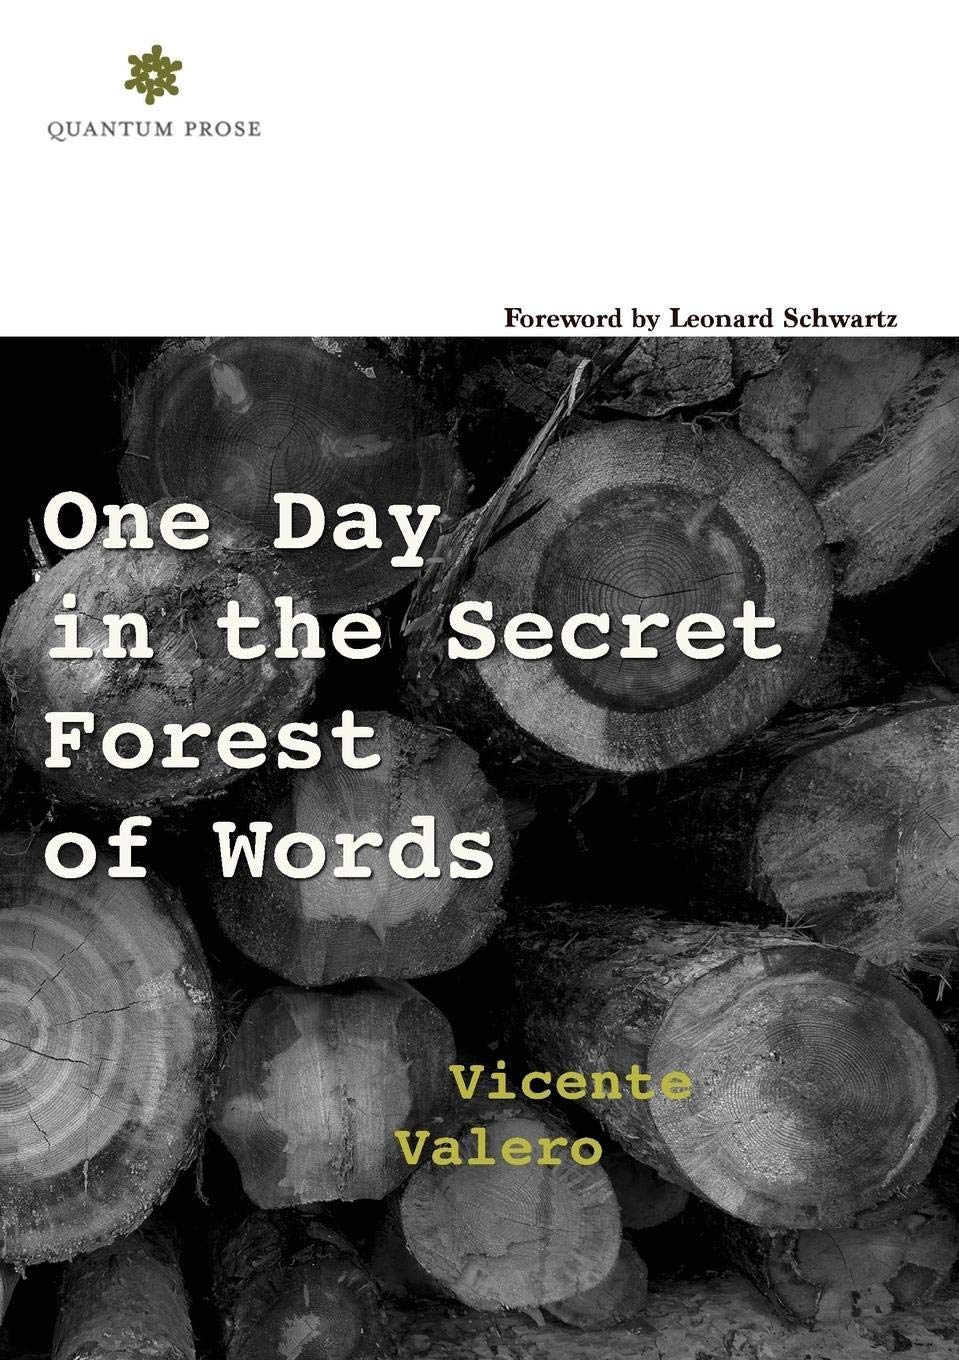 One Day in the Secret Forest of Words by Vicente Valero